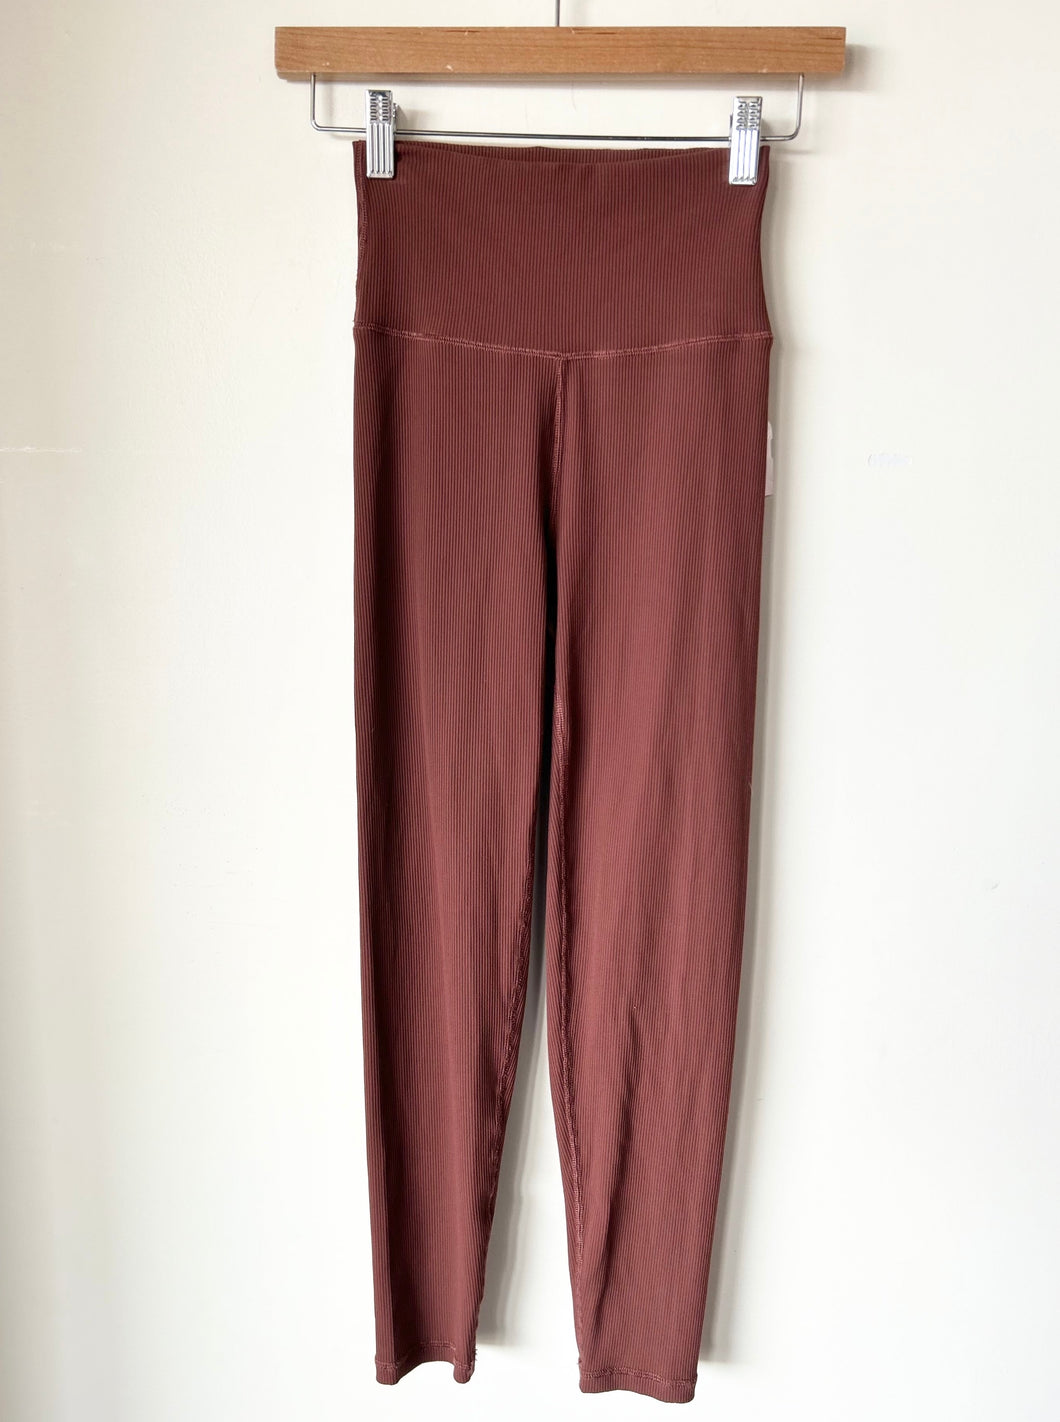 Offline Athletic Pants Size Small